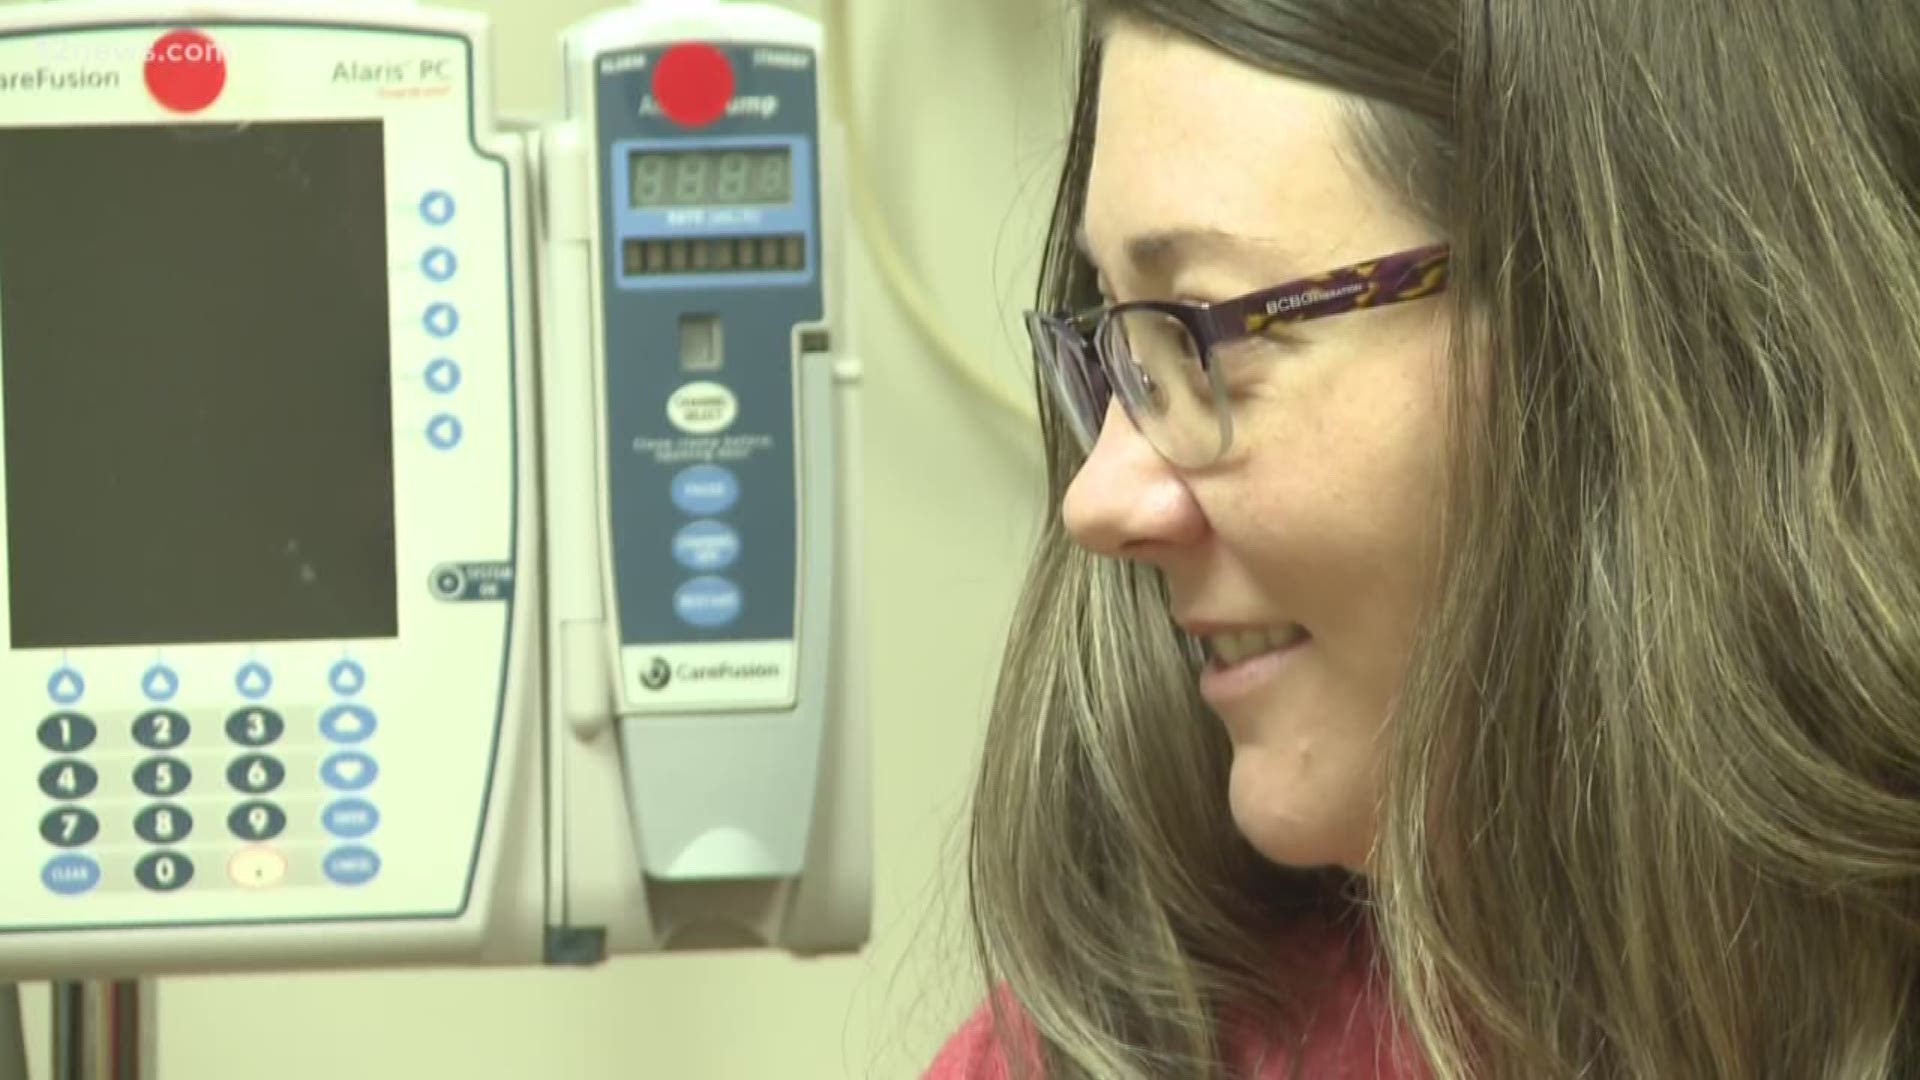 Ashley Wolfe is battling lung cancer and about to undergo chemotherapy after delivering her daughter at 34 weeks.